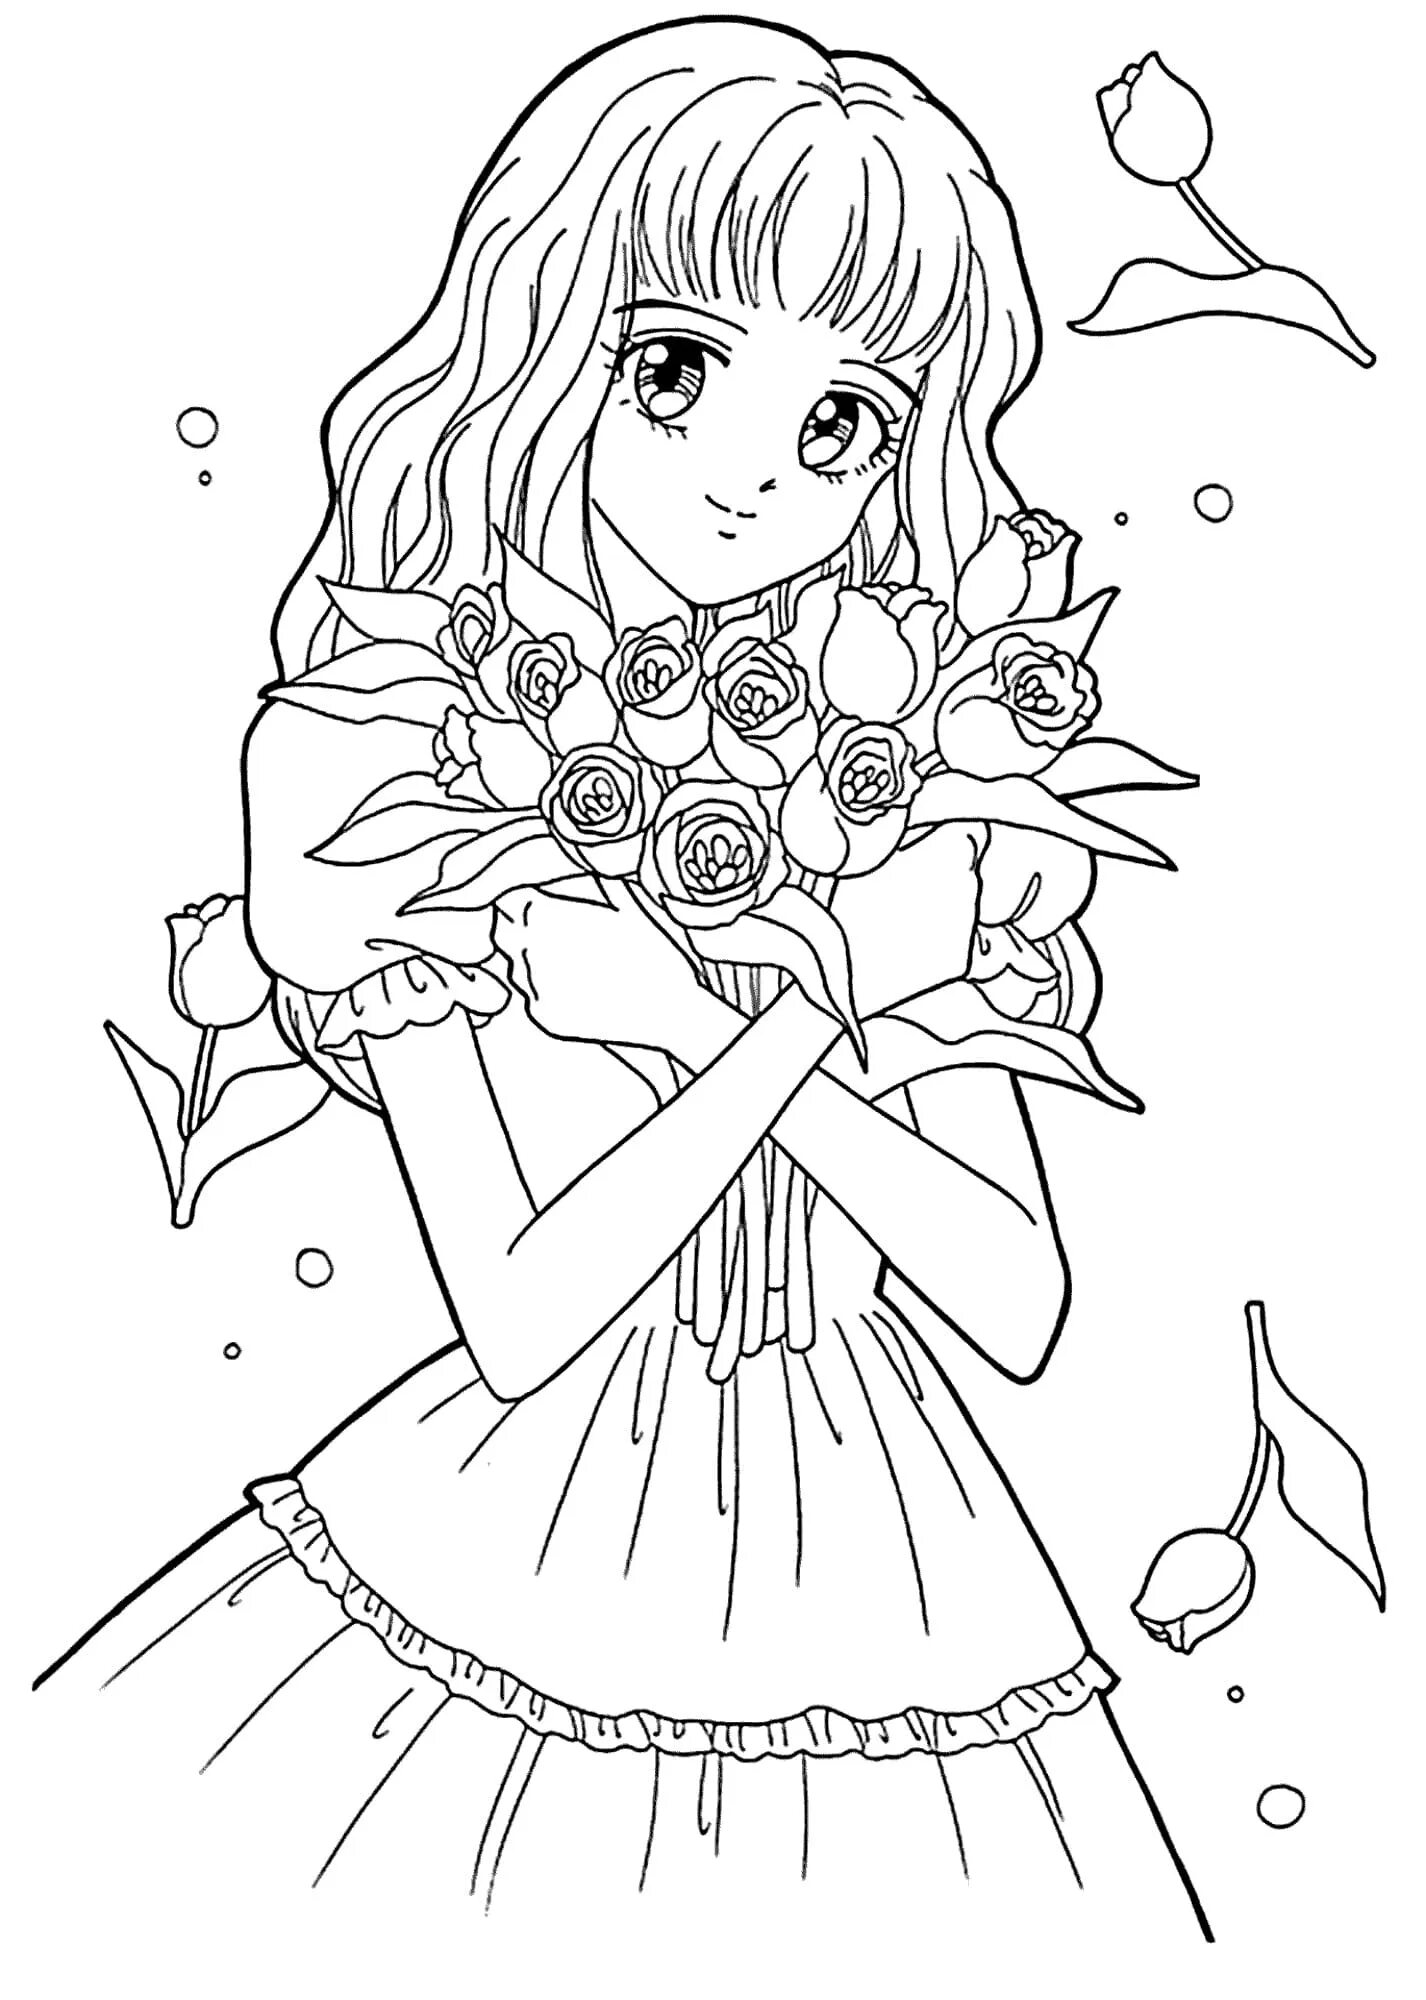 Violent coloring page 16 for girls